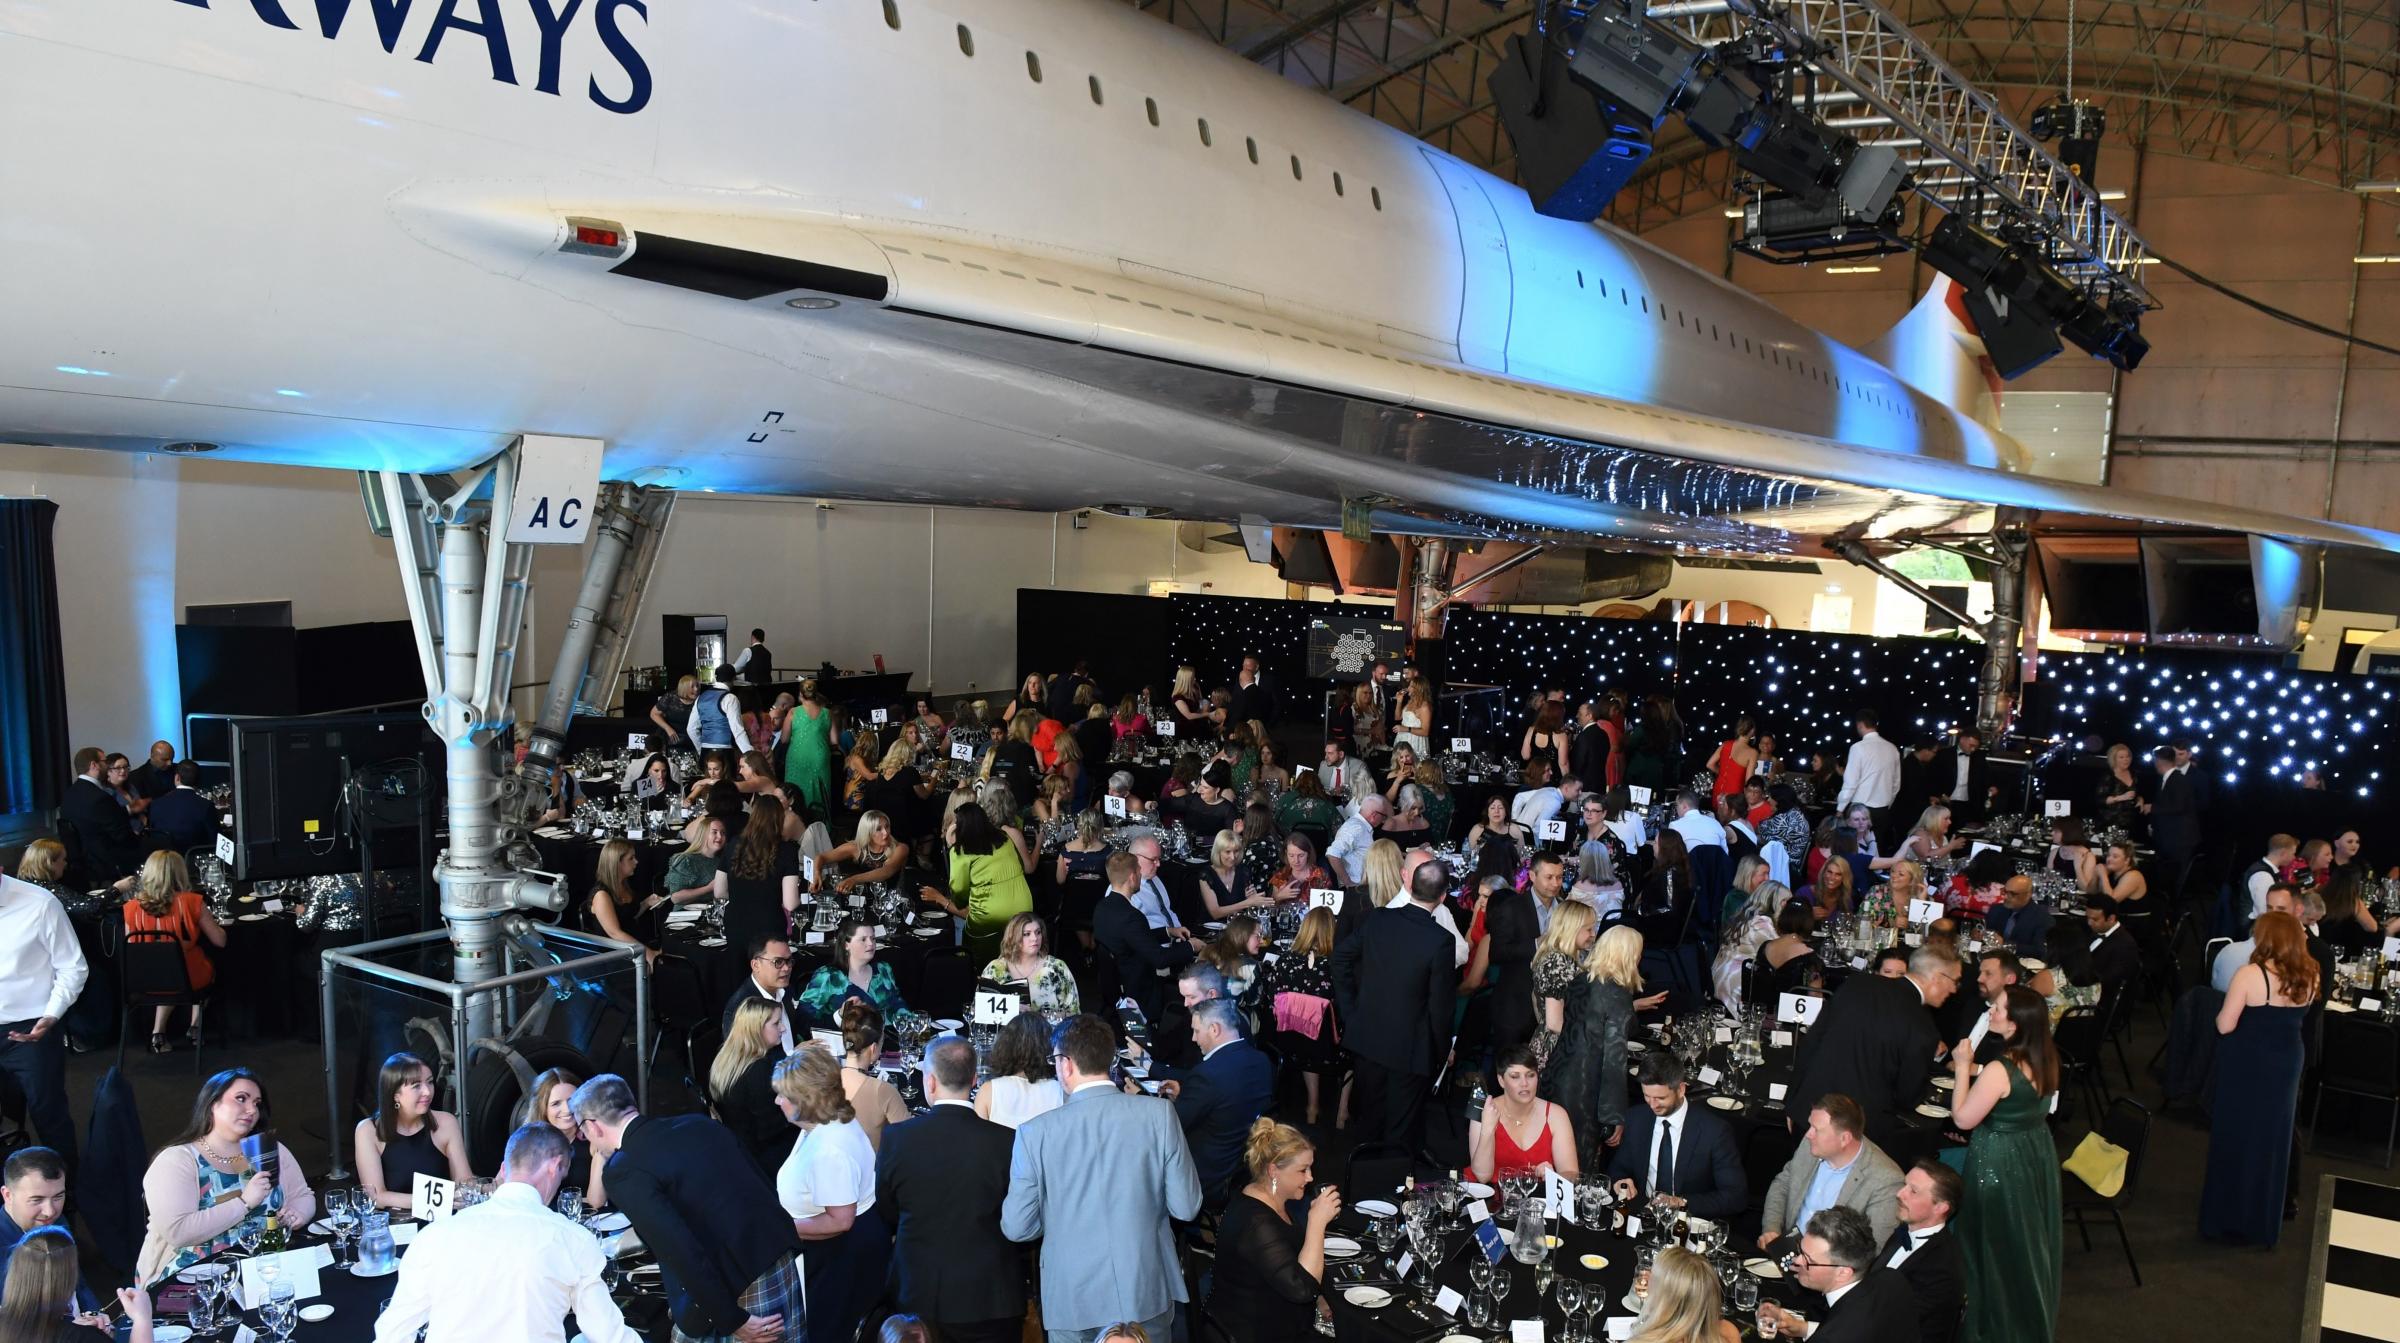 The awards were held at Concorde